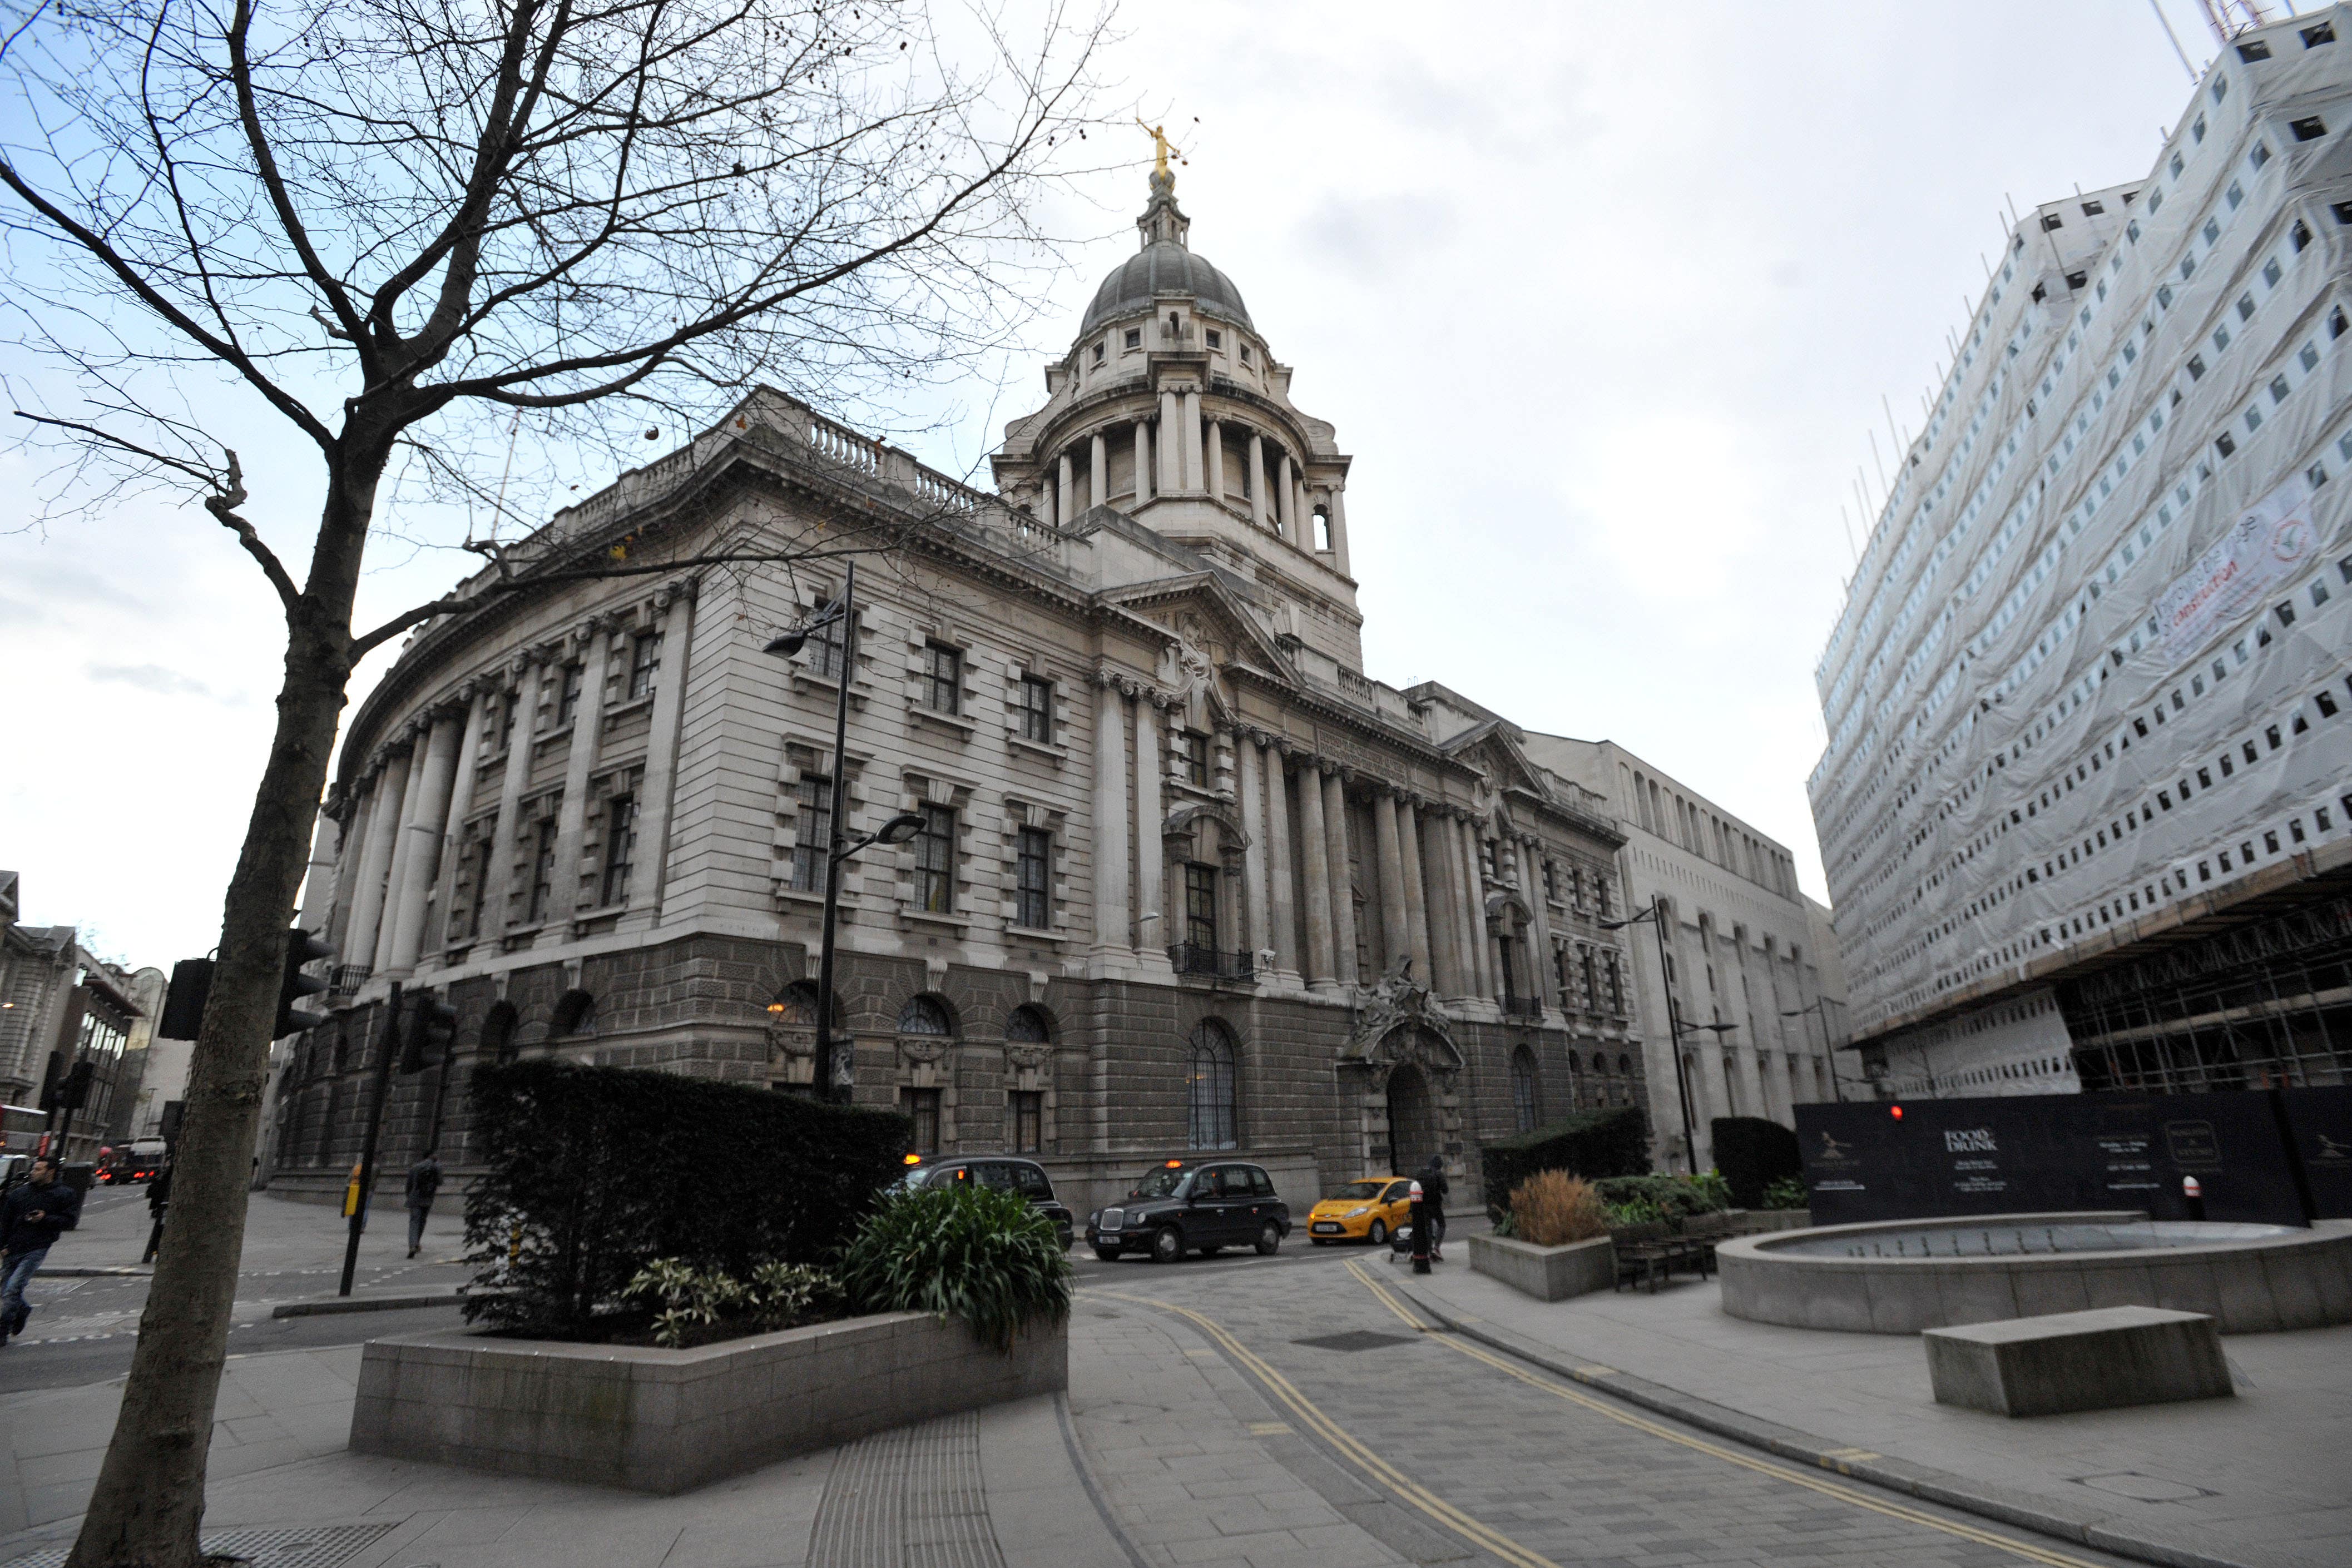 On Thursday, Judge Alexia Durran sentenced Pearce at the Old Bailey to two years in jail, suspended for two years